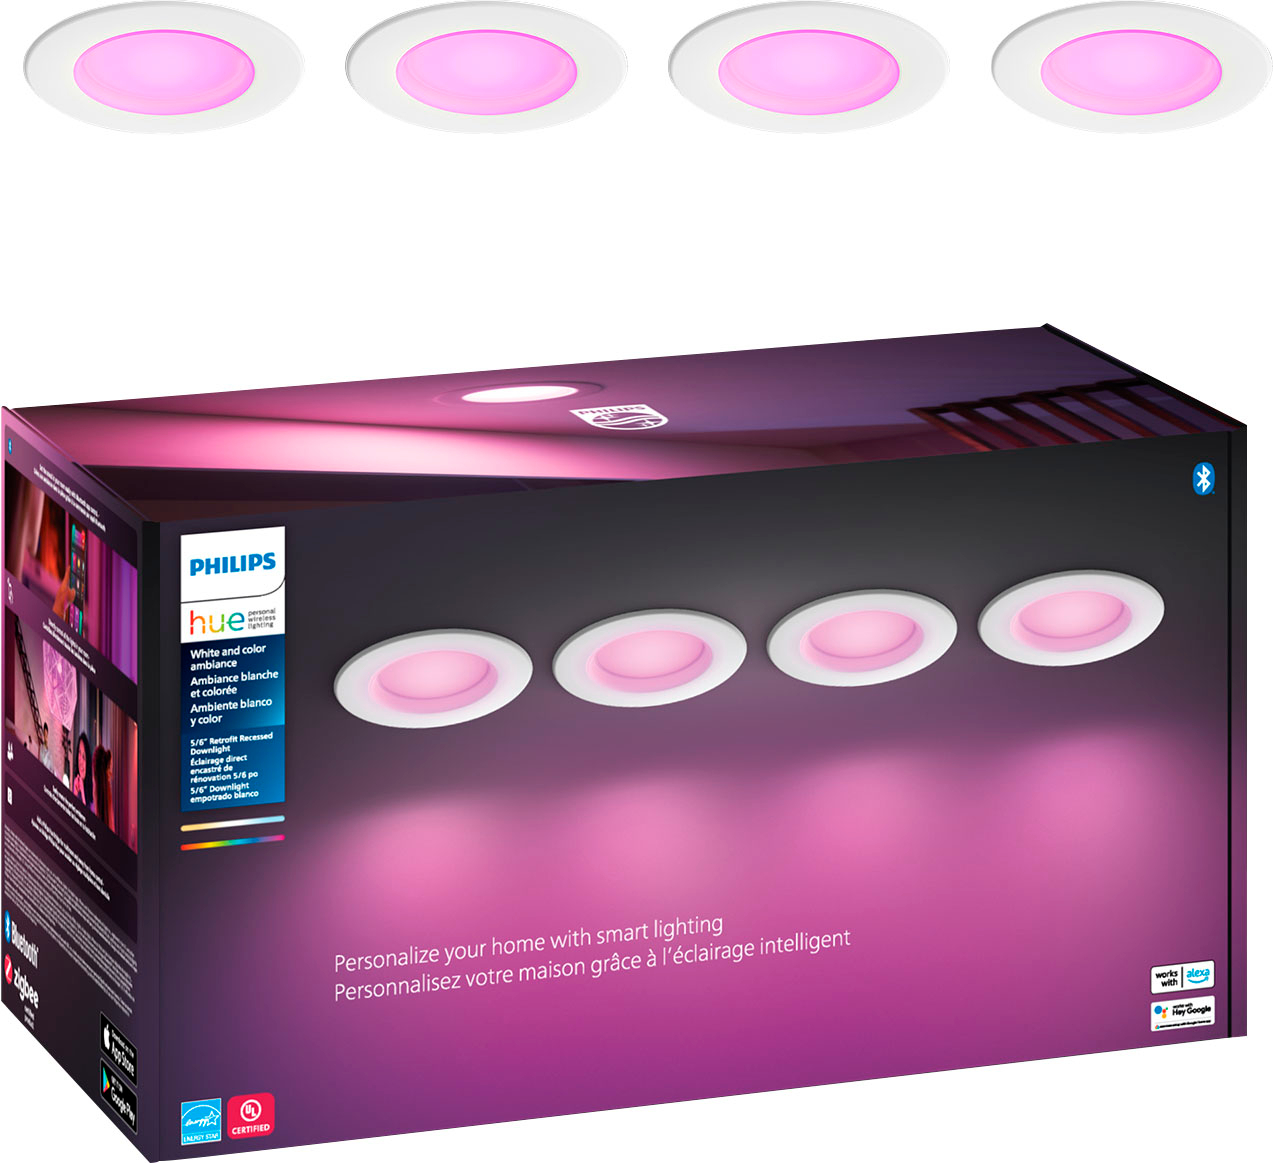 Riskeren Confronteren gans Philips Hue White and Color Ambiance 5-6" High Lumen Recessed Downlight  (4-pack) White 578674 - Best Buy